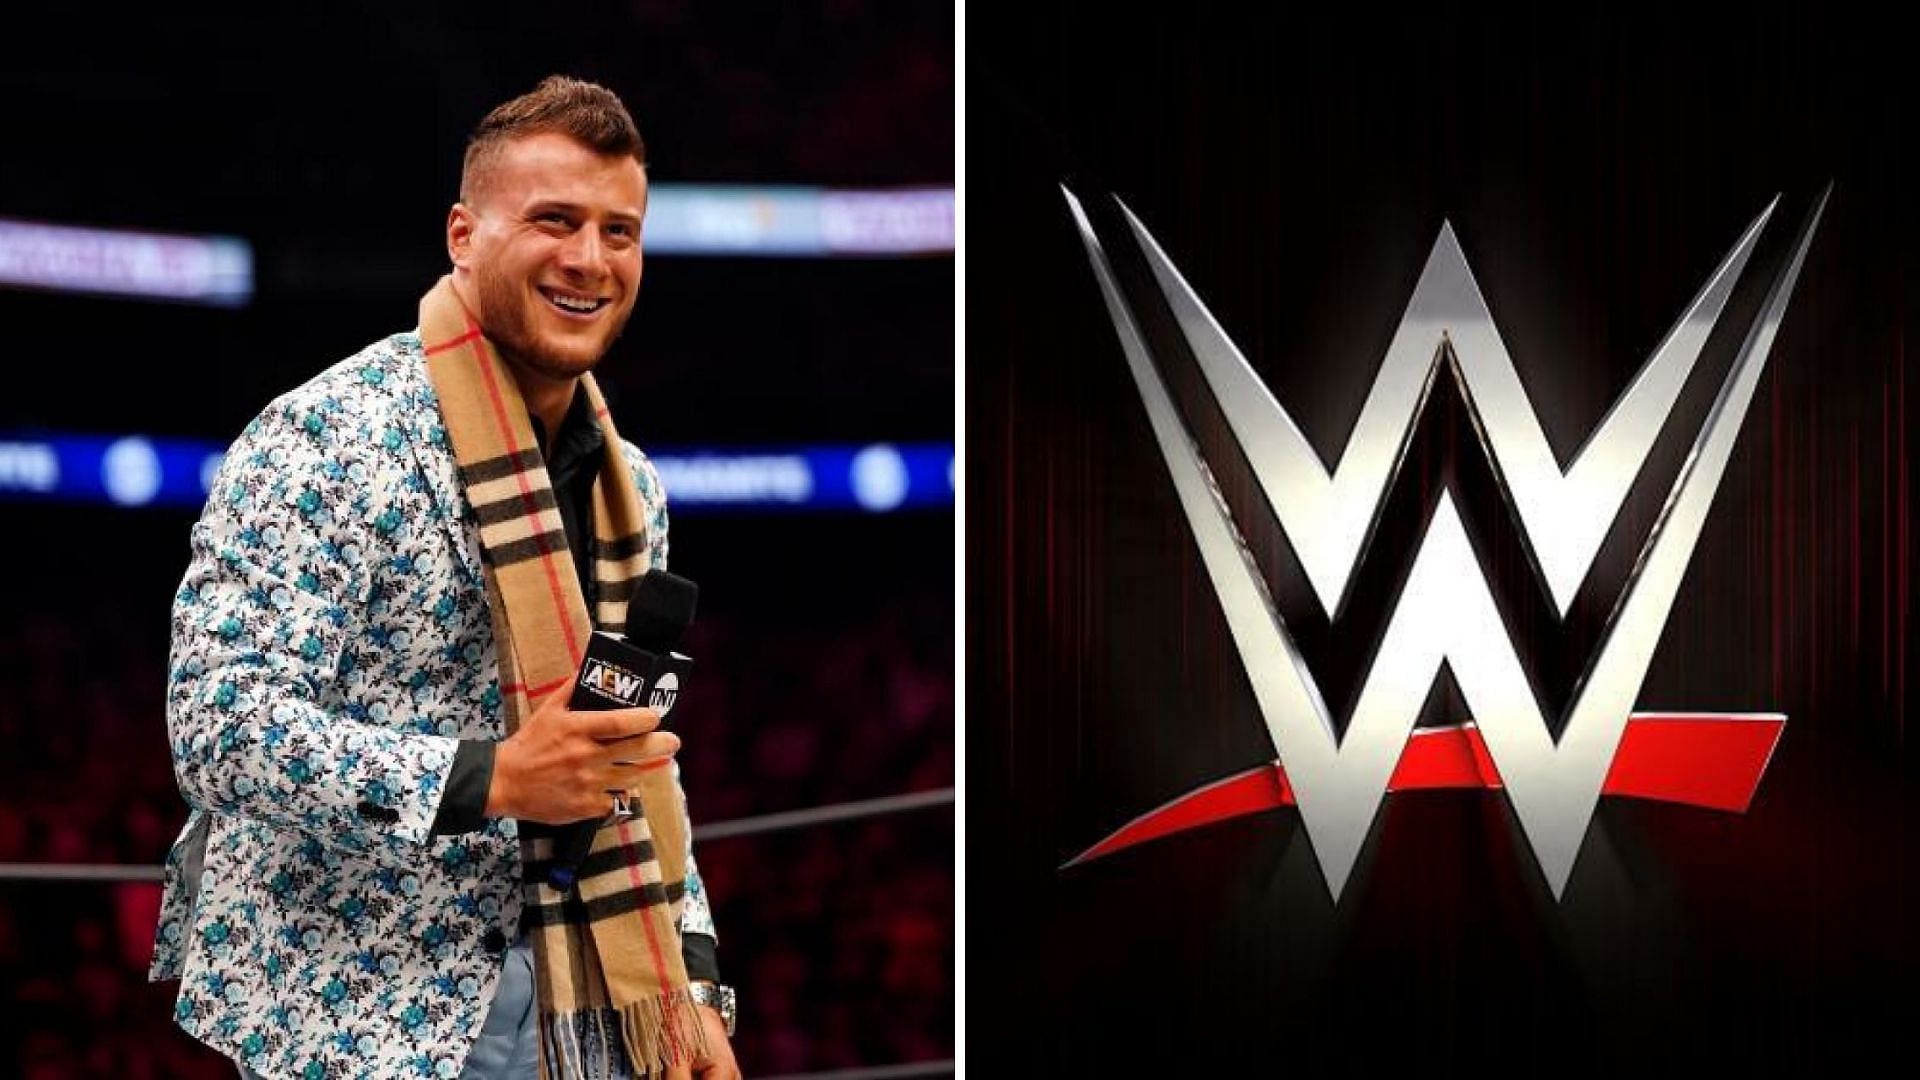 MJF seems to have a big goal if he makes it to WWE